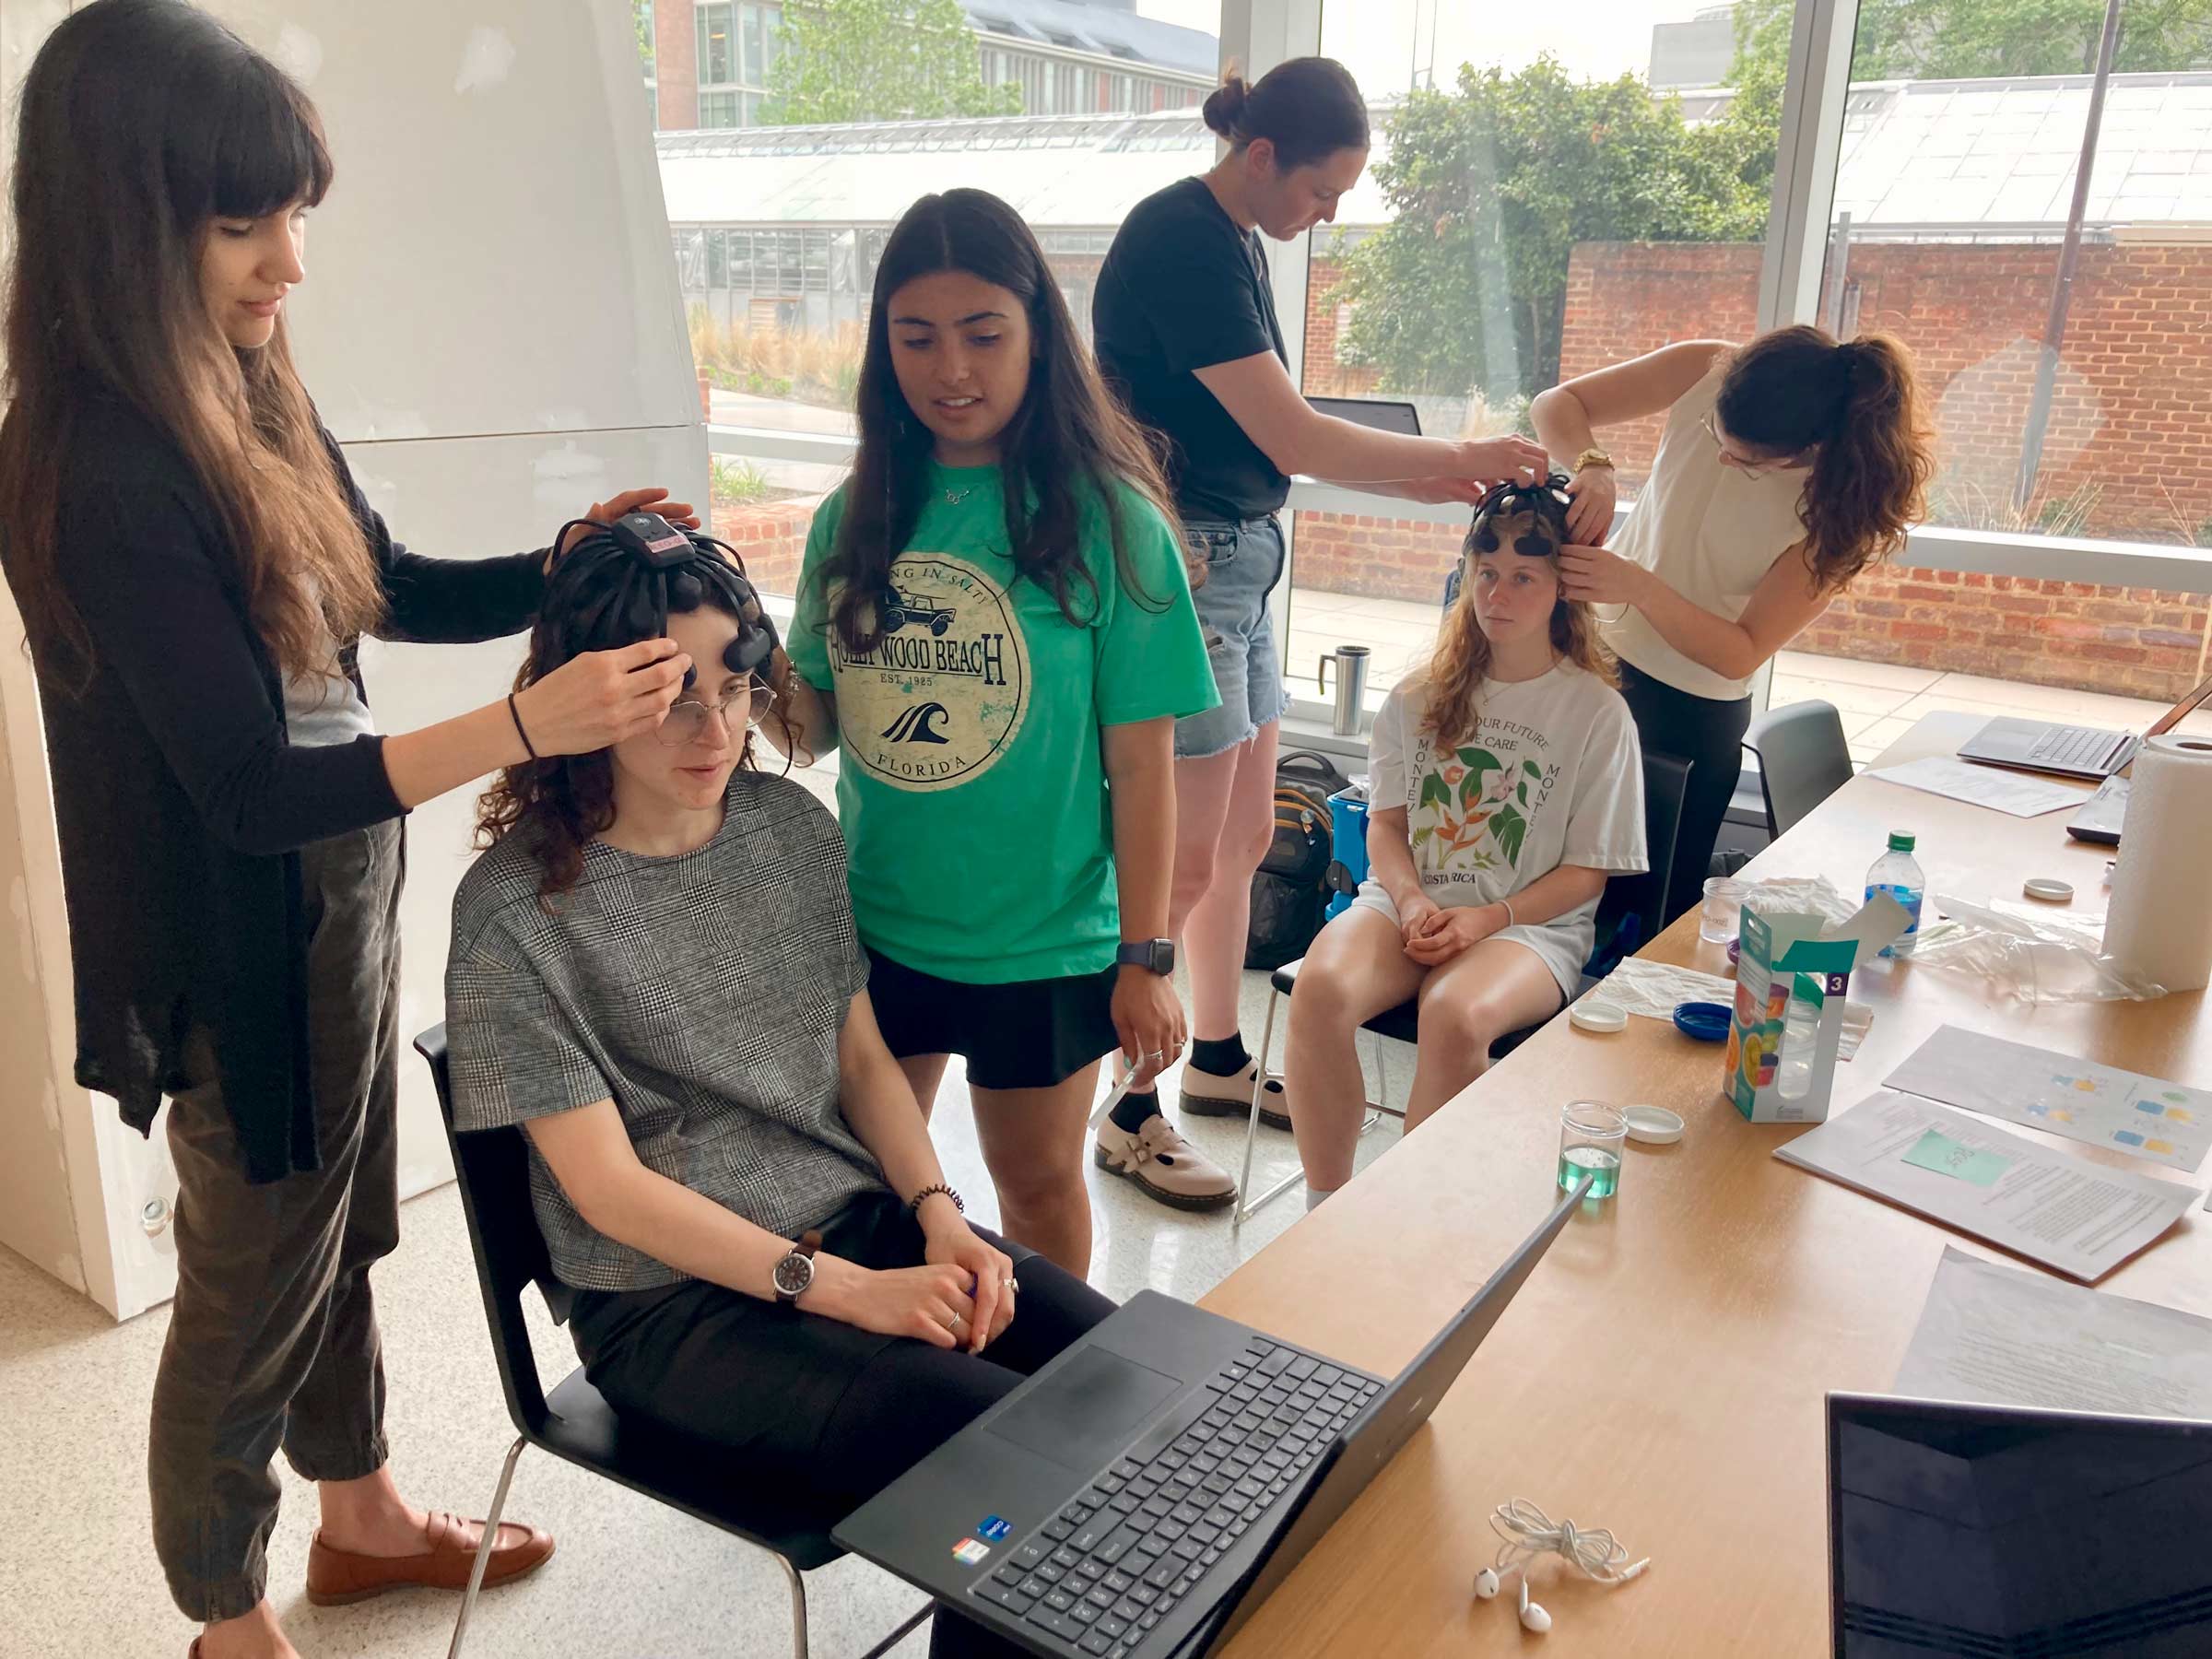 Julie Mollica, Analia Mazoratti, Margaret Saunders and Gabby Snetkov attach sensors to participants in the study. The sensors helped measure participants' reactions to the different chambers. 